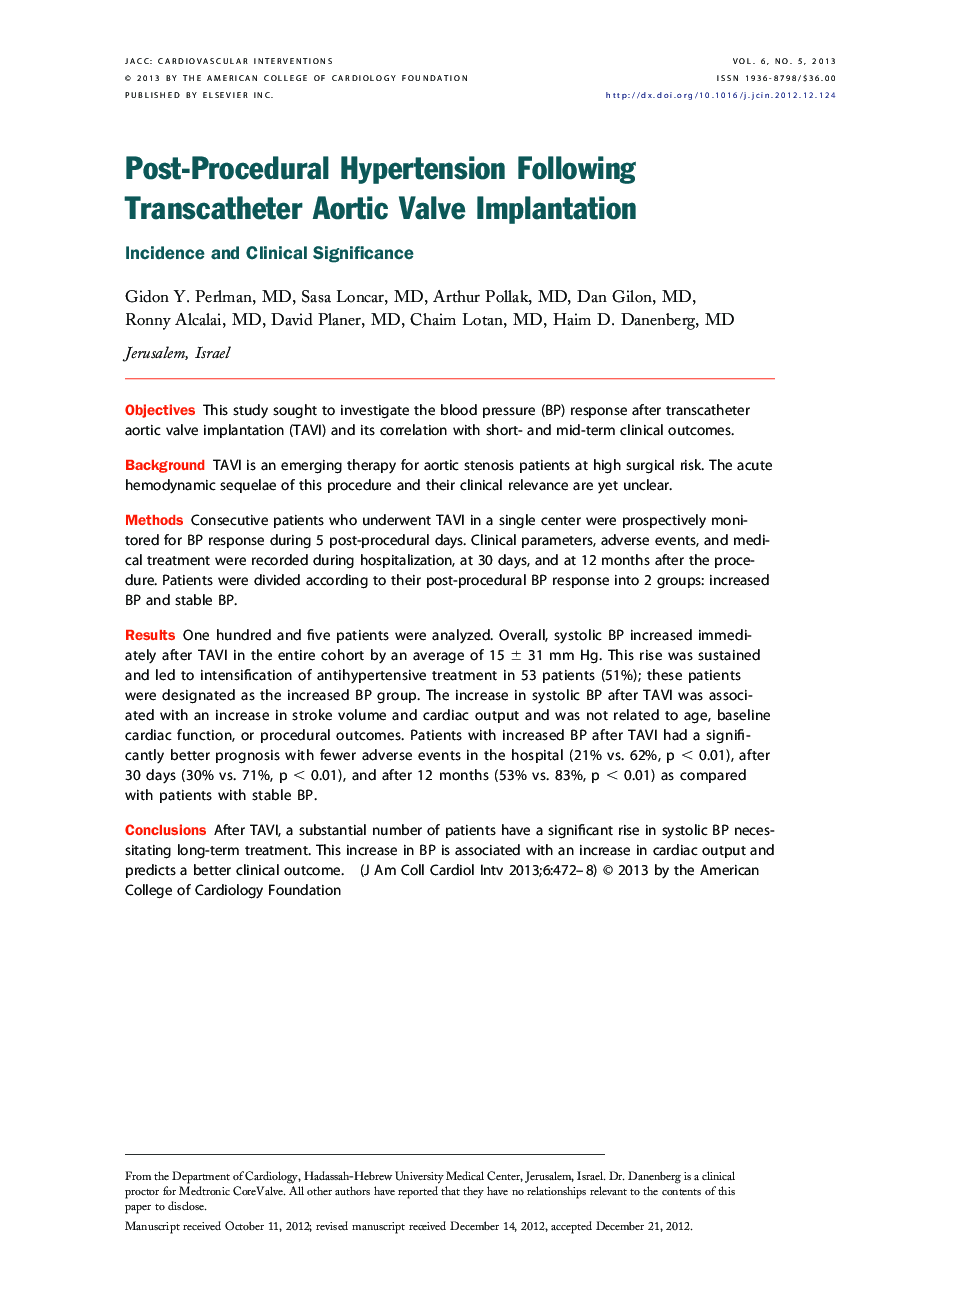 Post-Procedural Hypertension Following Transcatheter Aortic Valve Implantation : Incidence and Clinical Significance